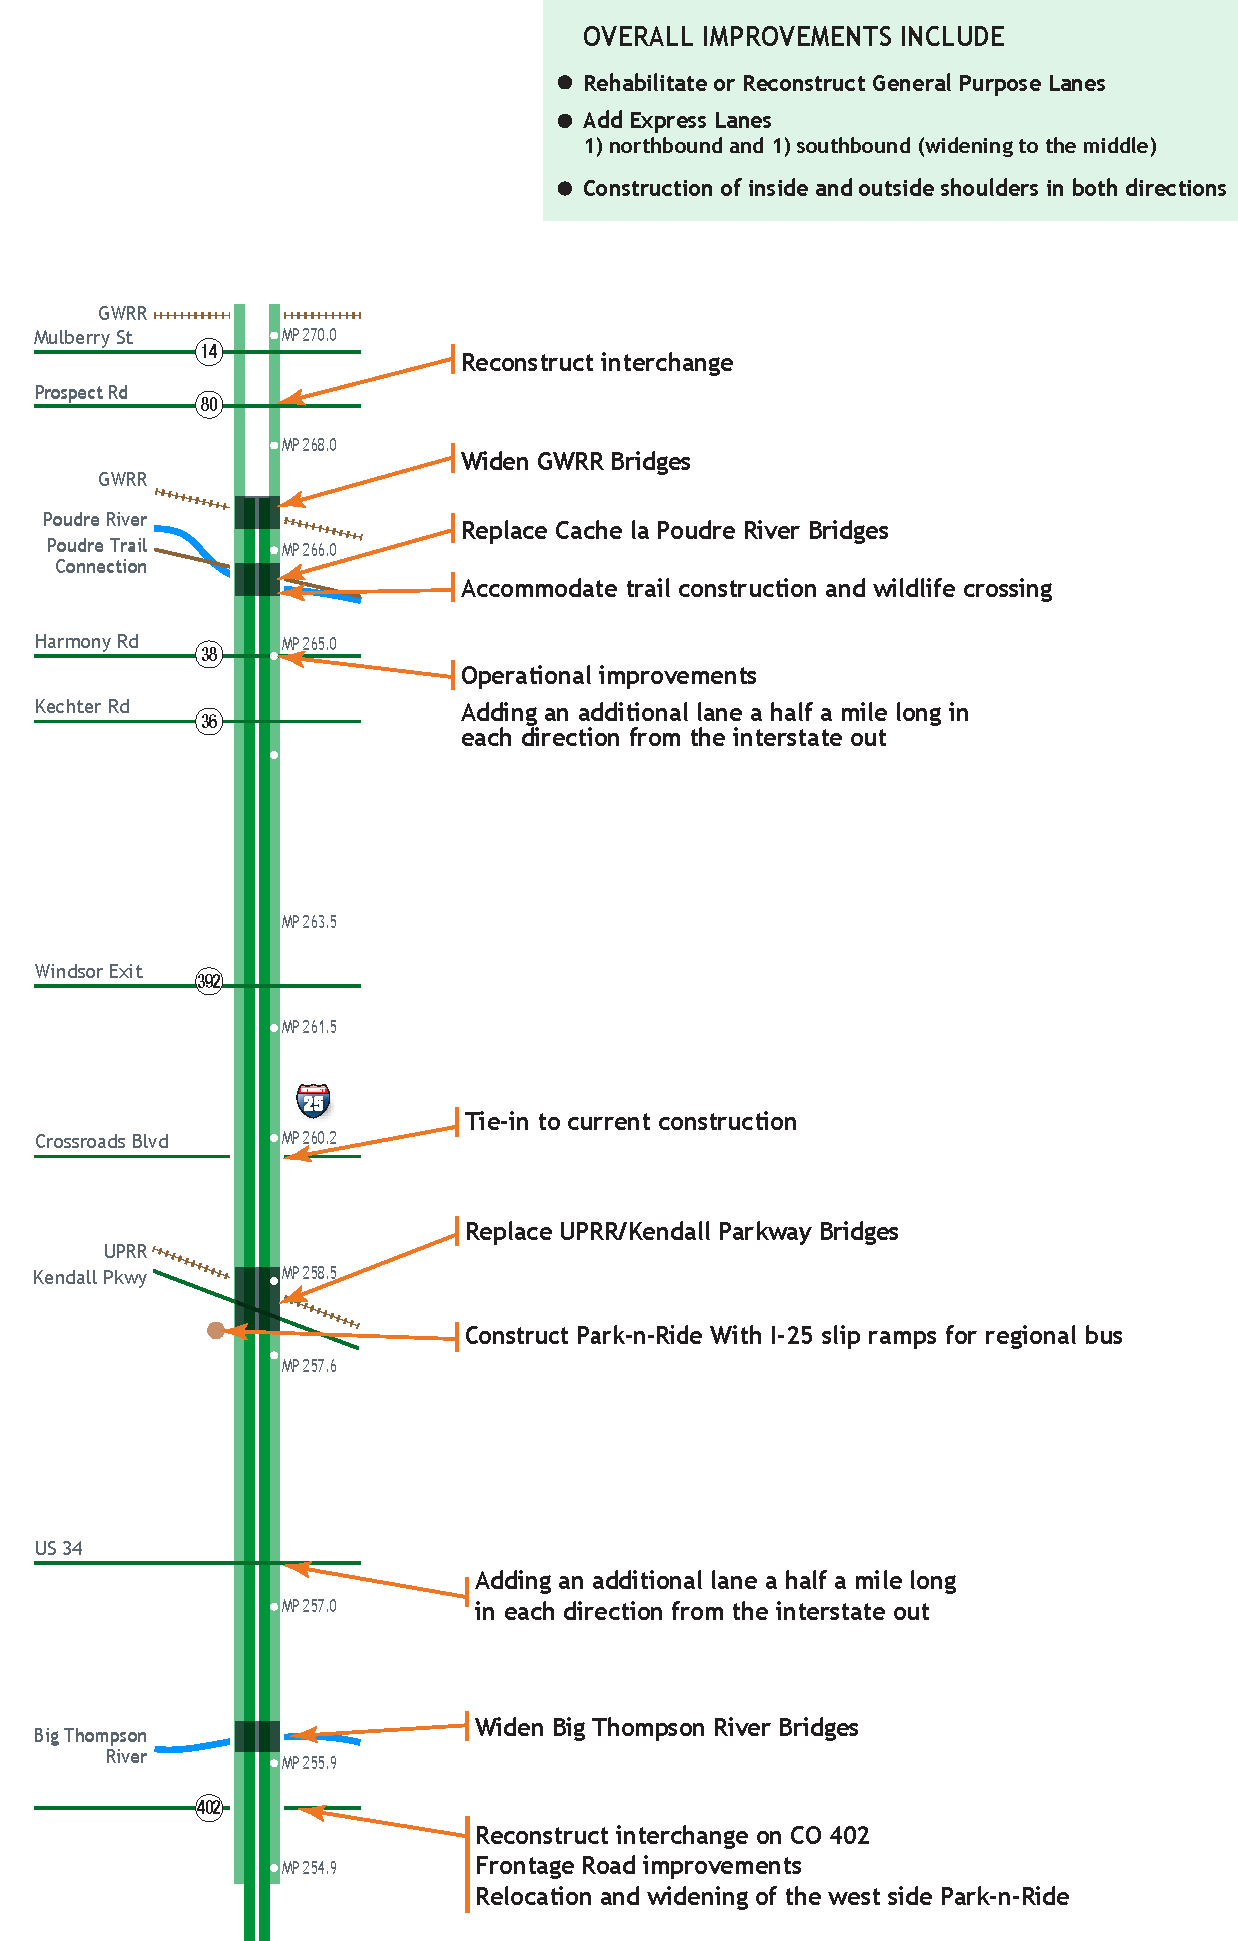 North I-25 Overall Improvements.png detail image